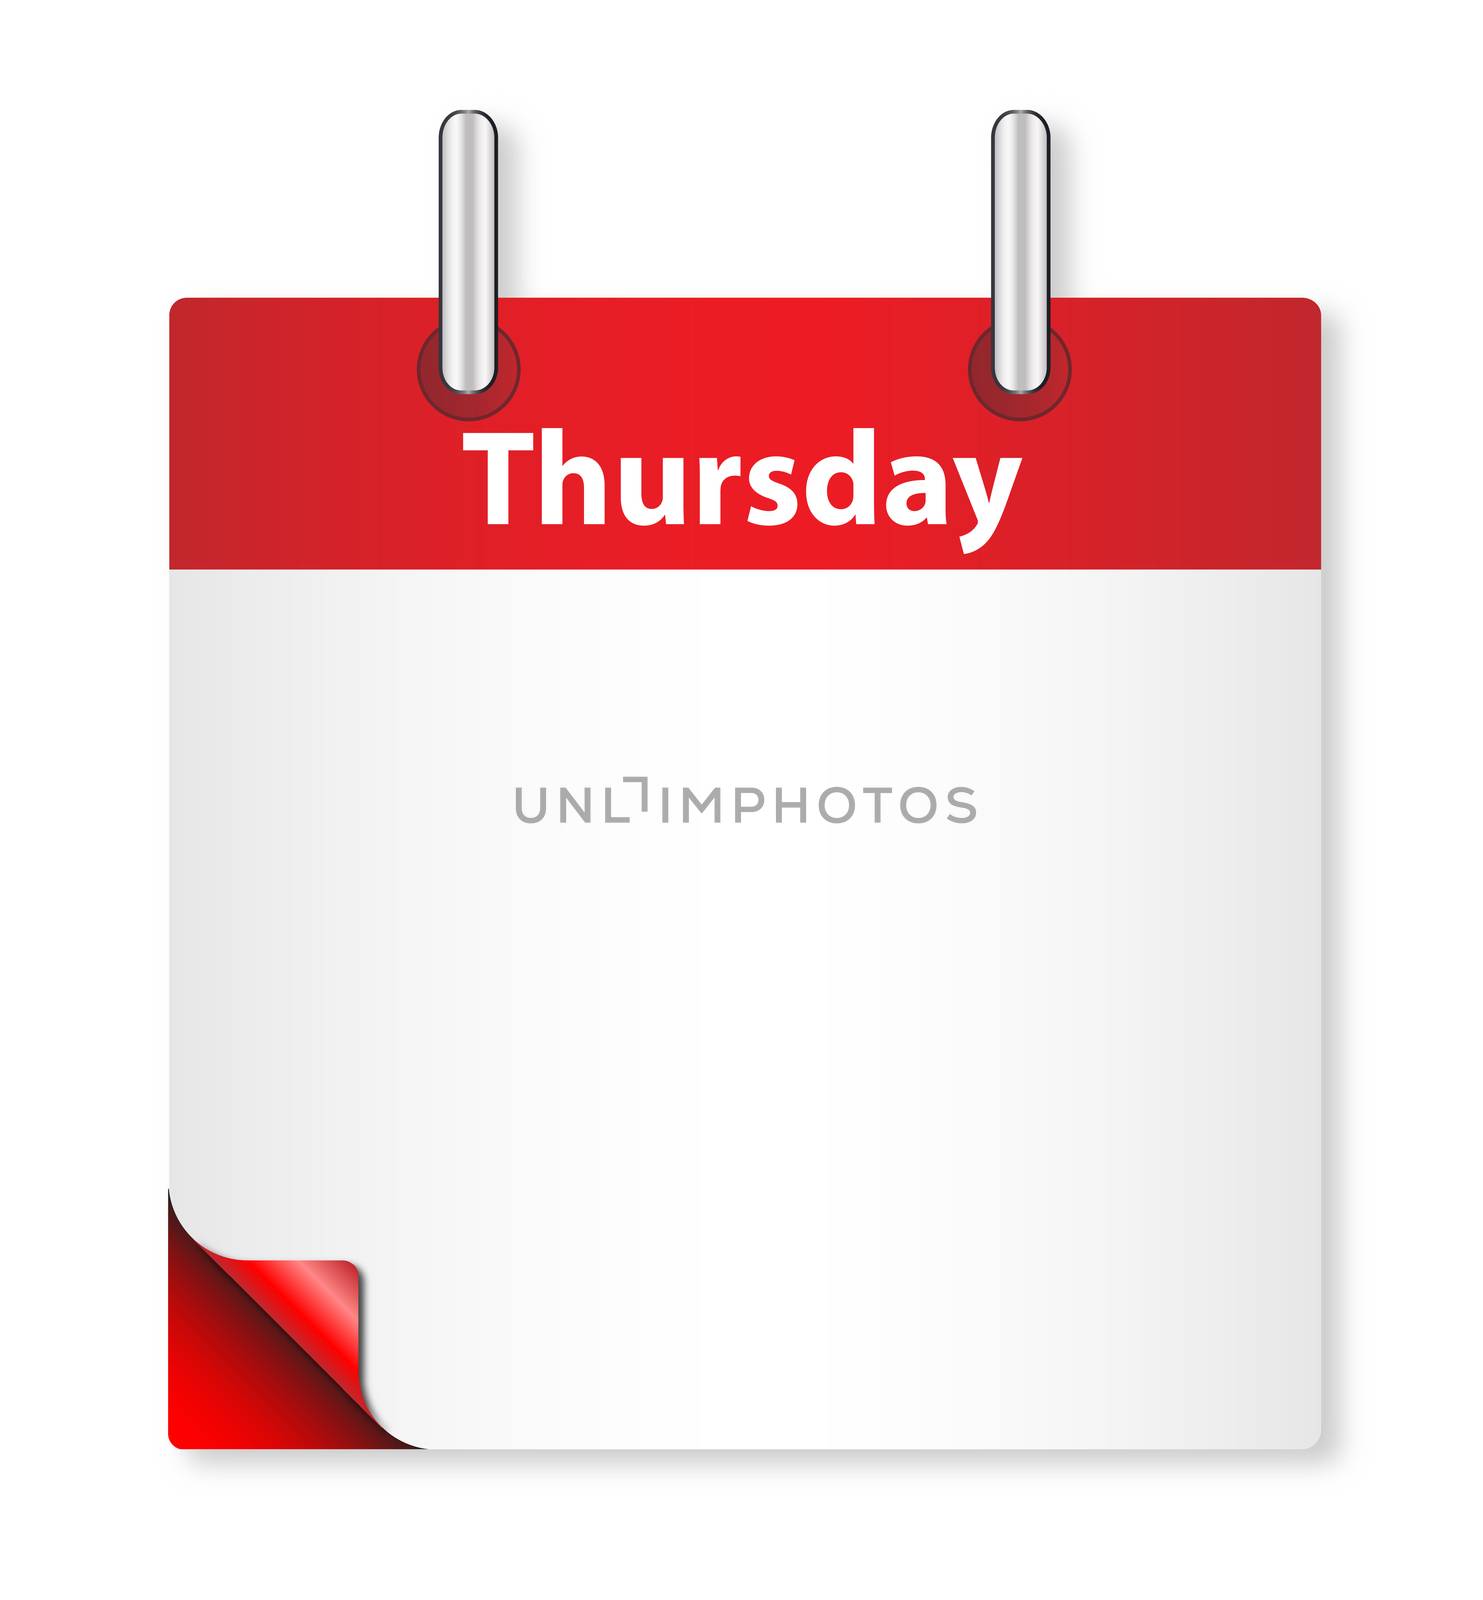 A calender date offering a blank Thursday page over white